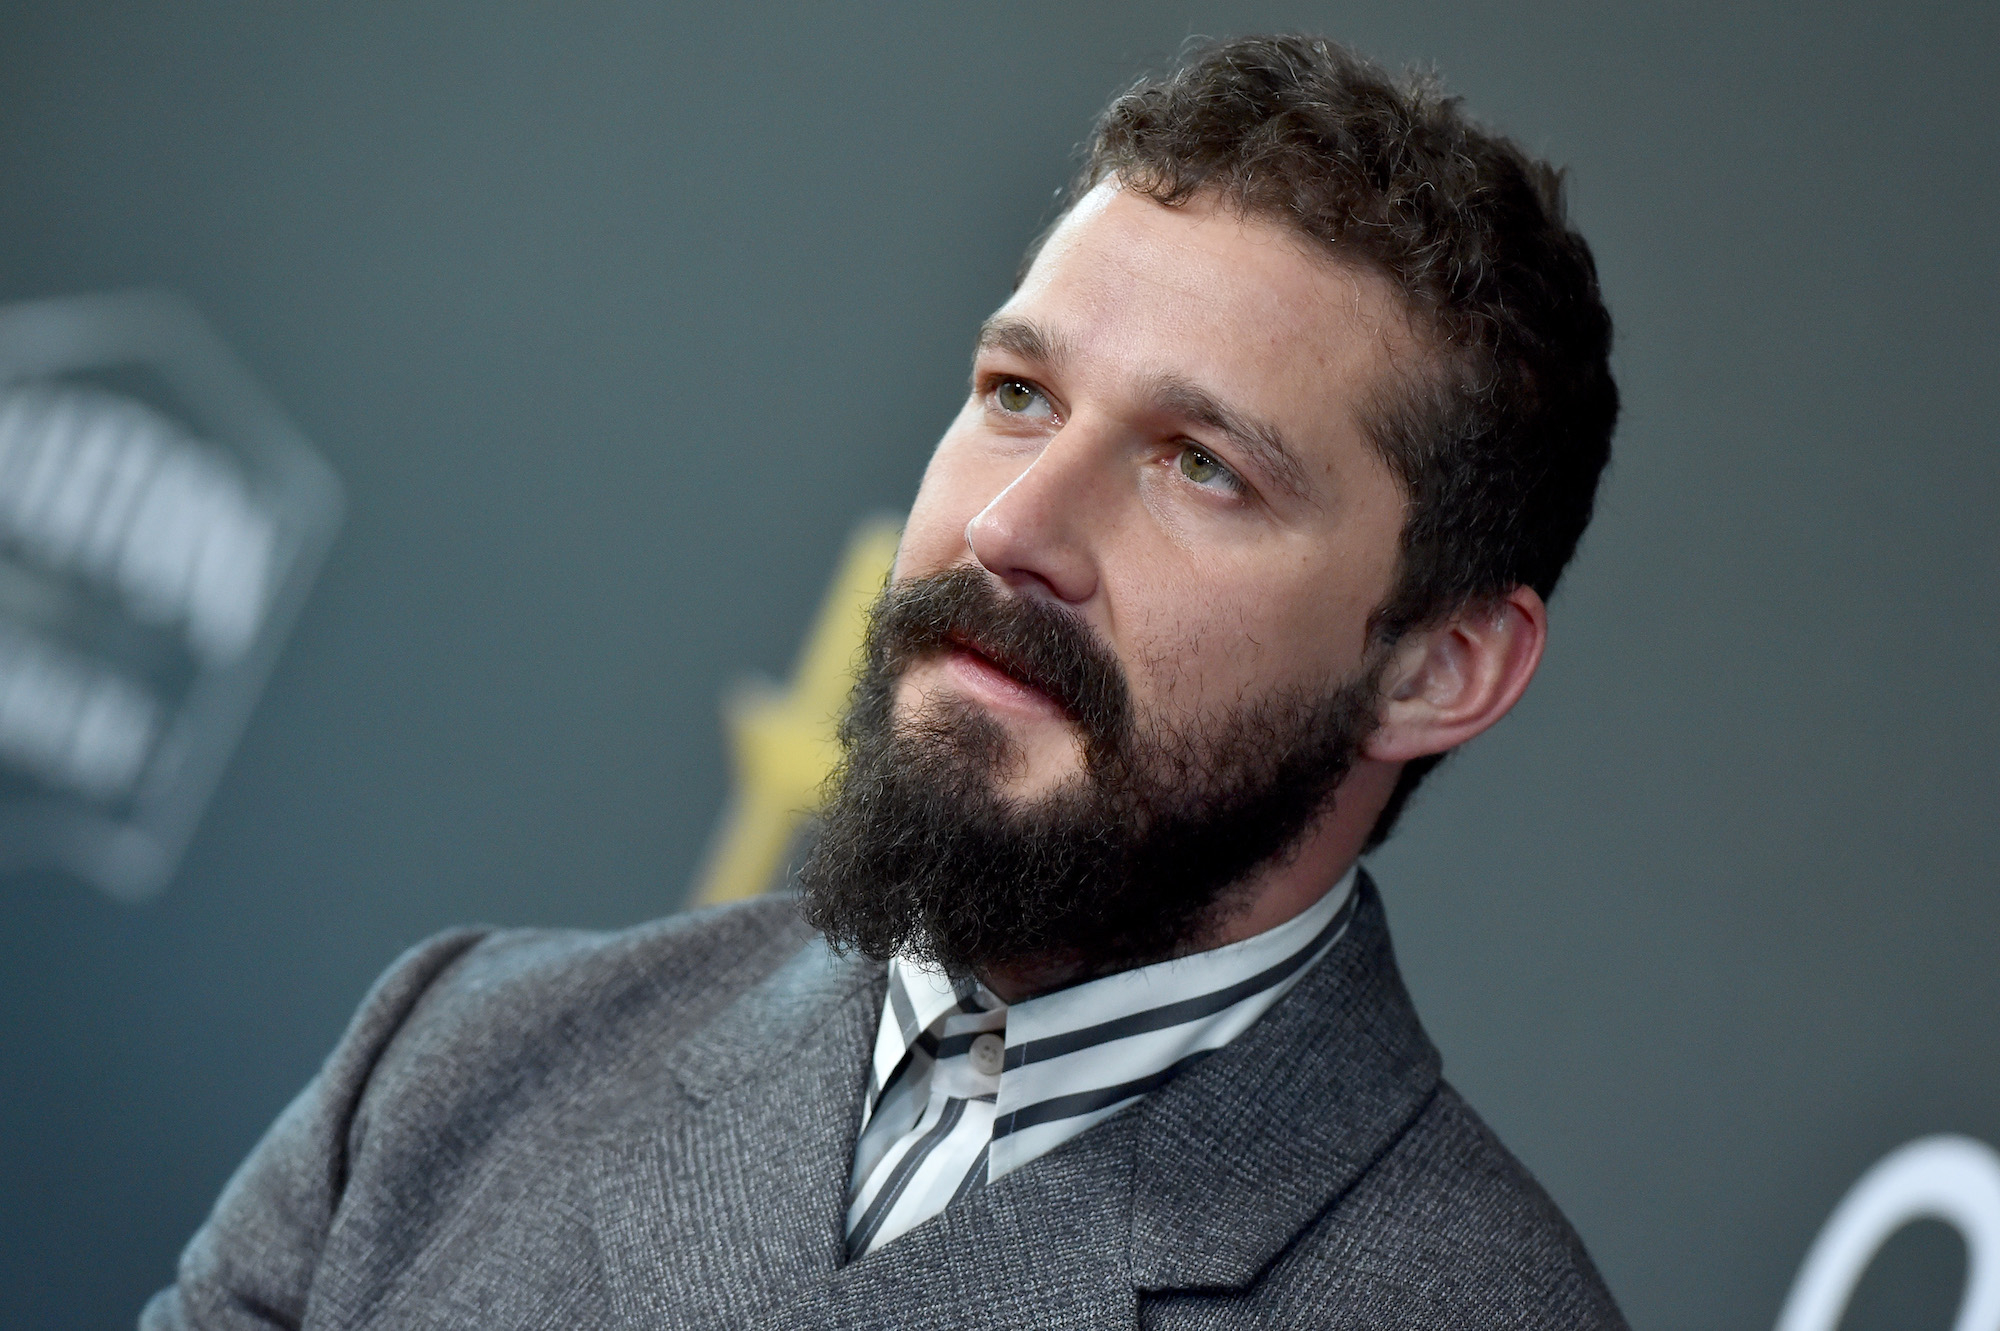 Shia LaBeouf looking off camera in front of a gray background